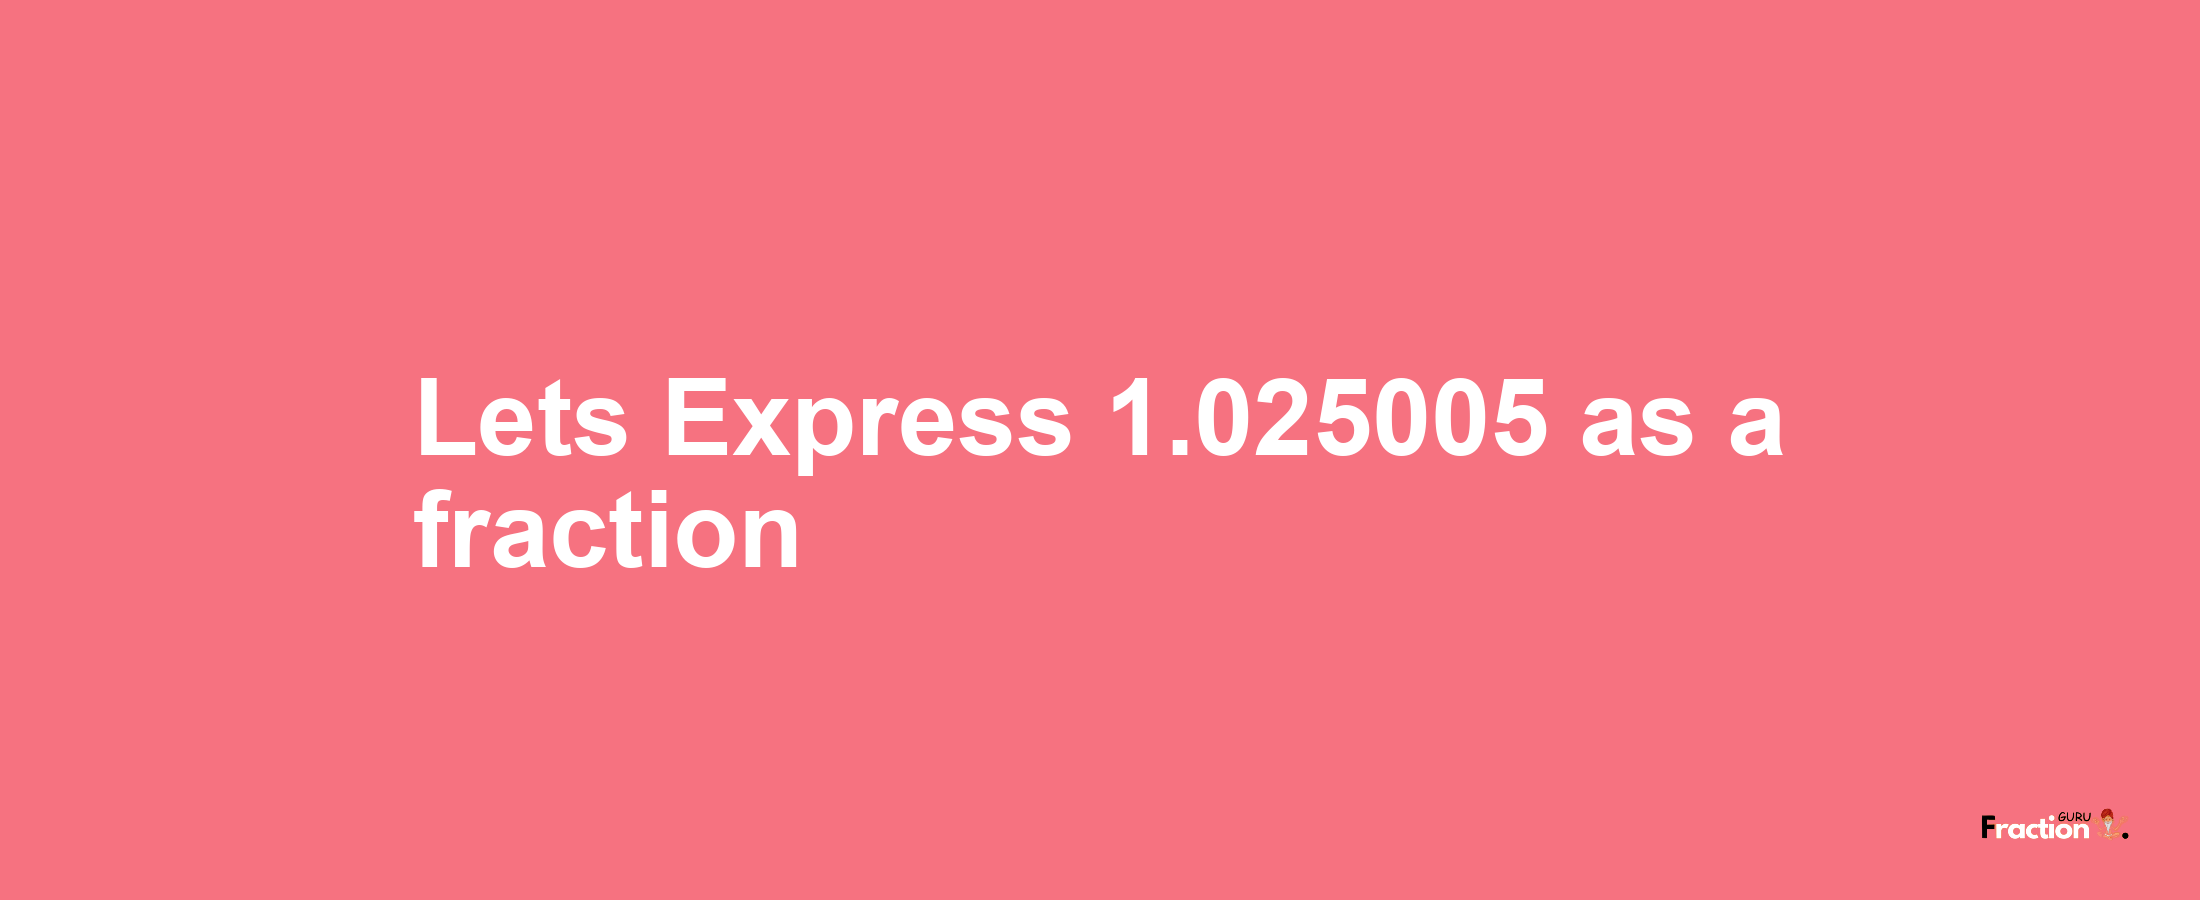 Lets Express 1.025005 as afraction